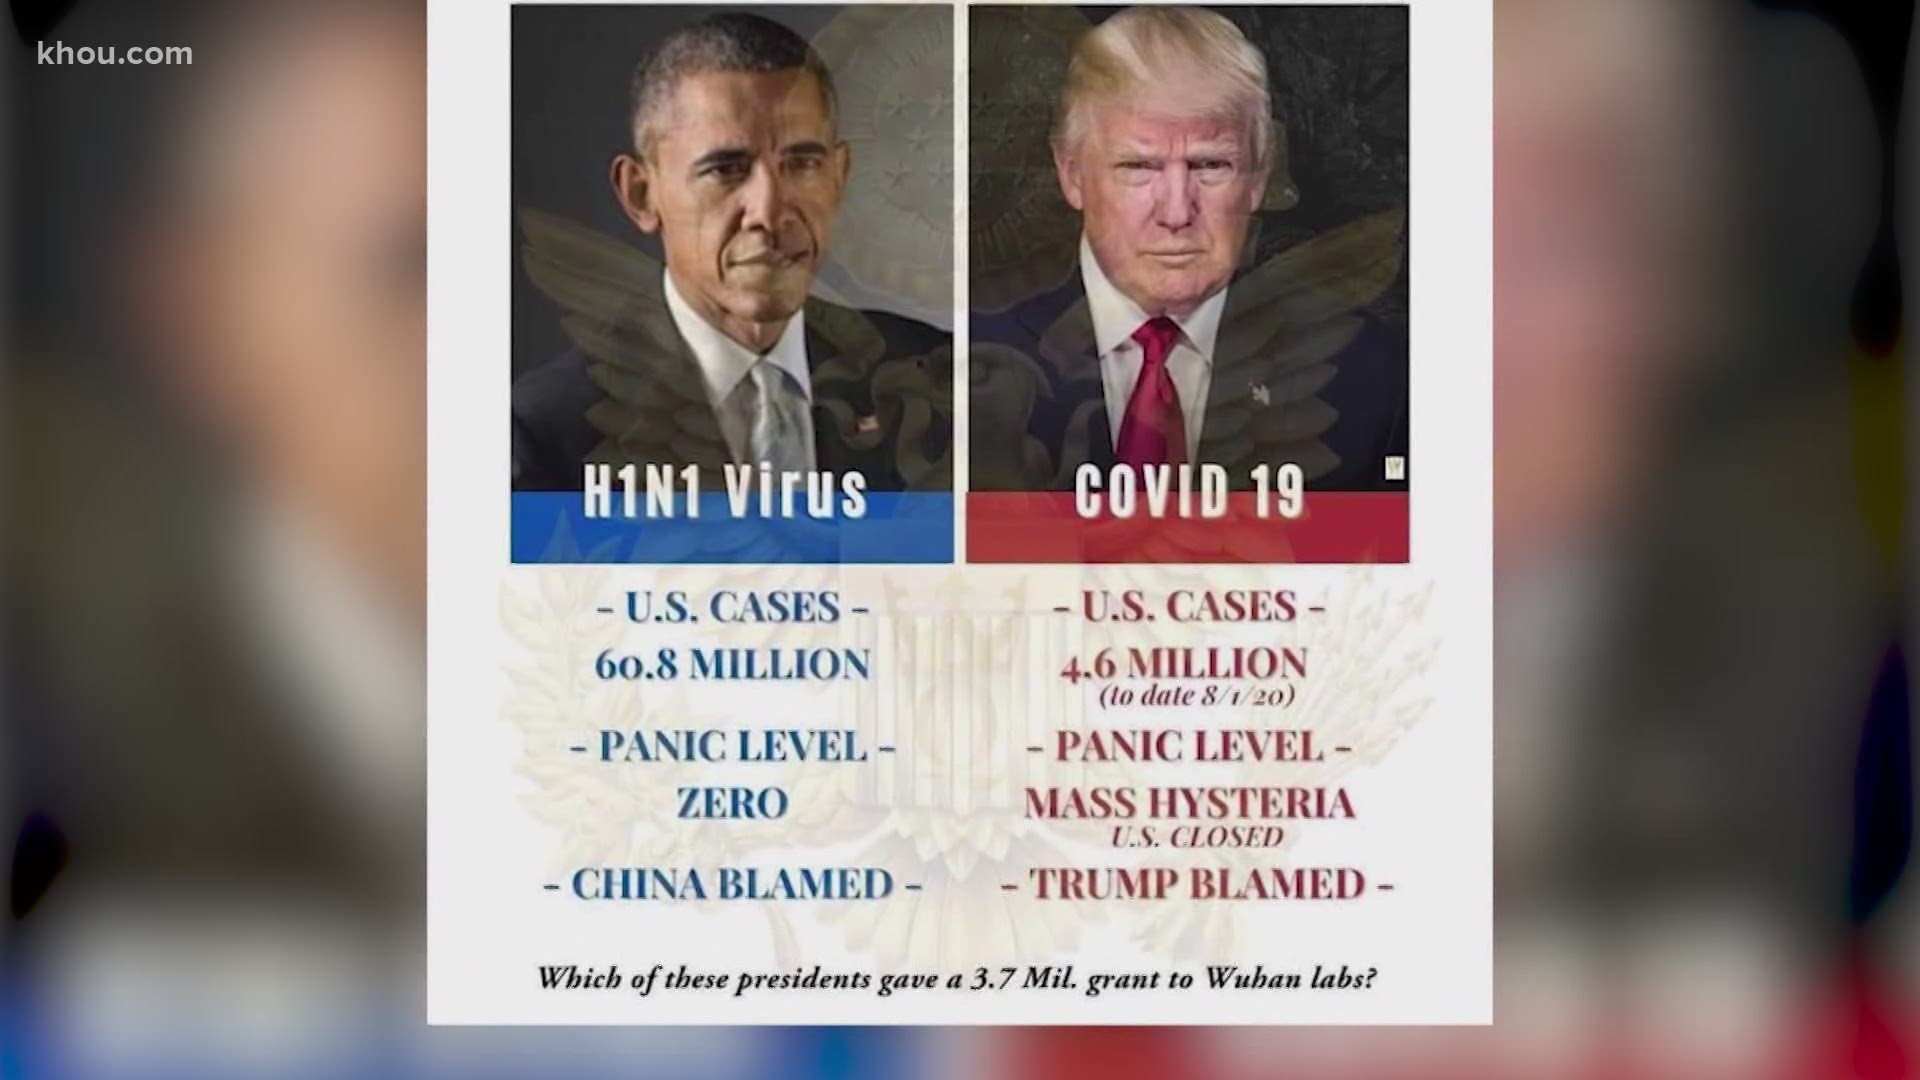 A meme comparing President Barack Obama and President Donald Trump and the pandemics they faced in office is spreading all over social media.